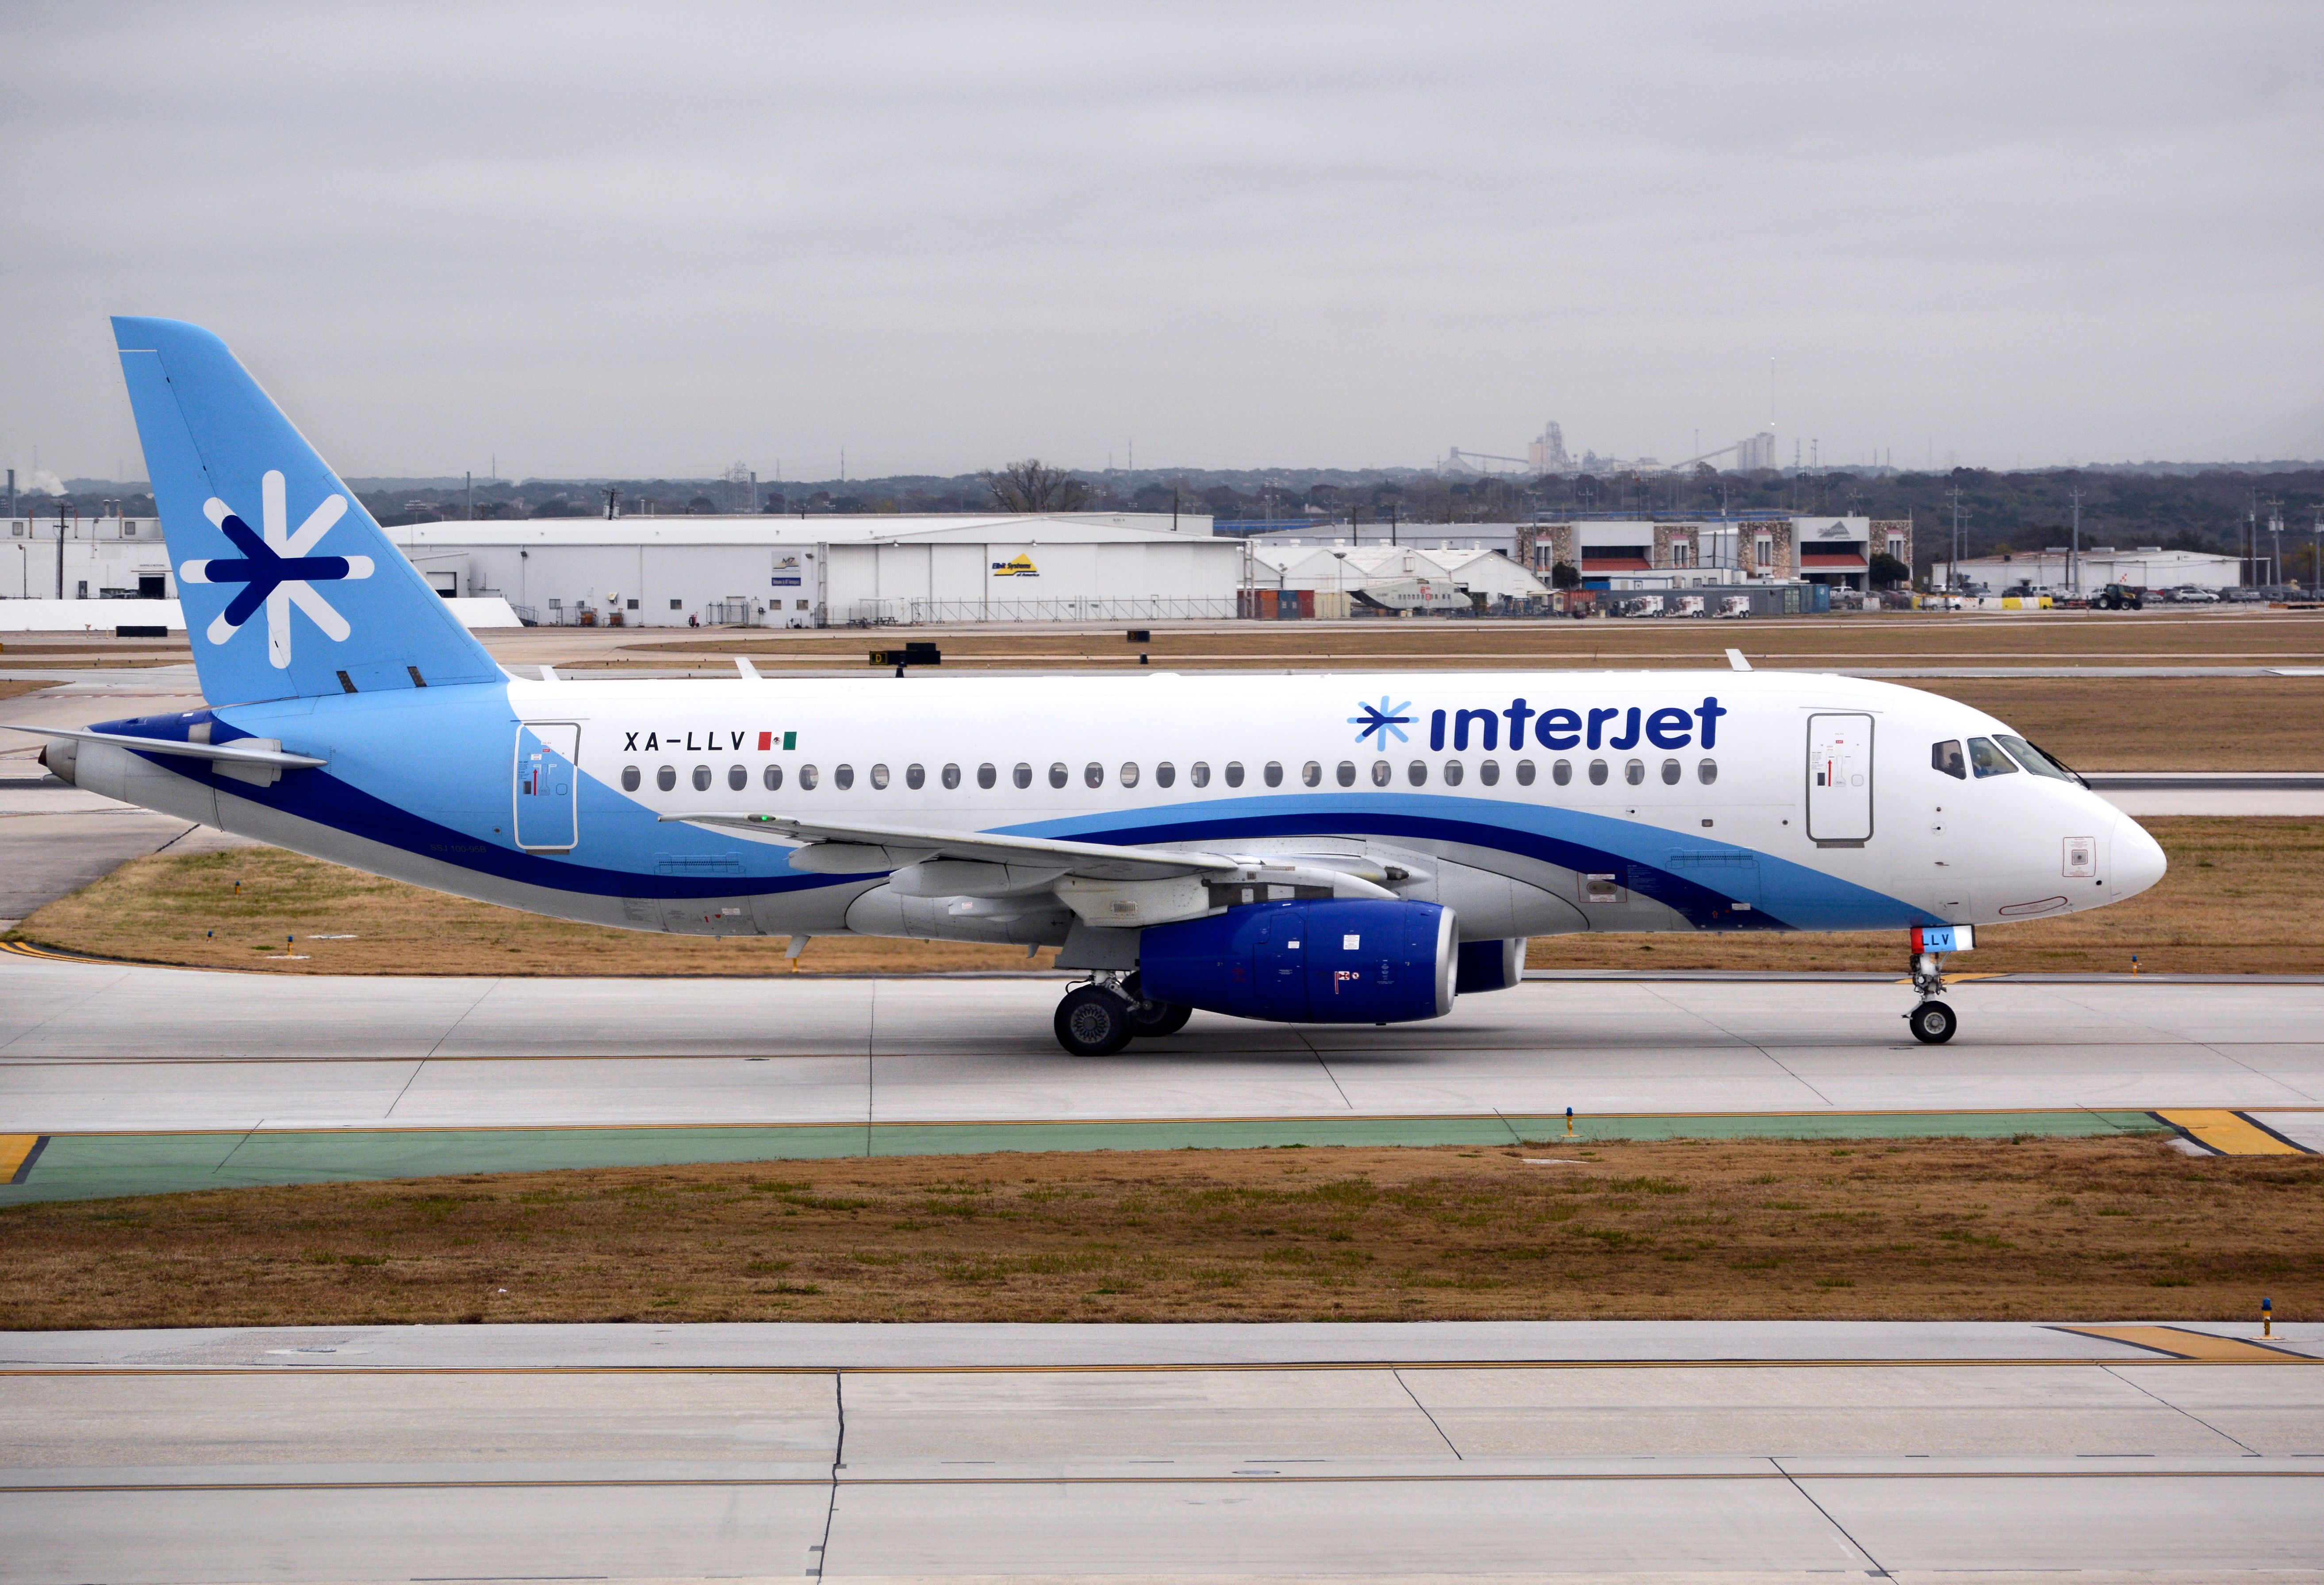 An Interjet Airlines Sukhoi Superjet passenger jet taxis after landing at San Antonio International Airport in Texas. Interjet was a Mexican airline headquartered in Mexico City. 